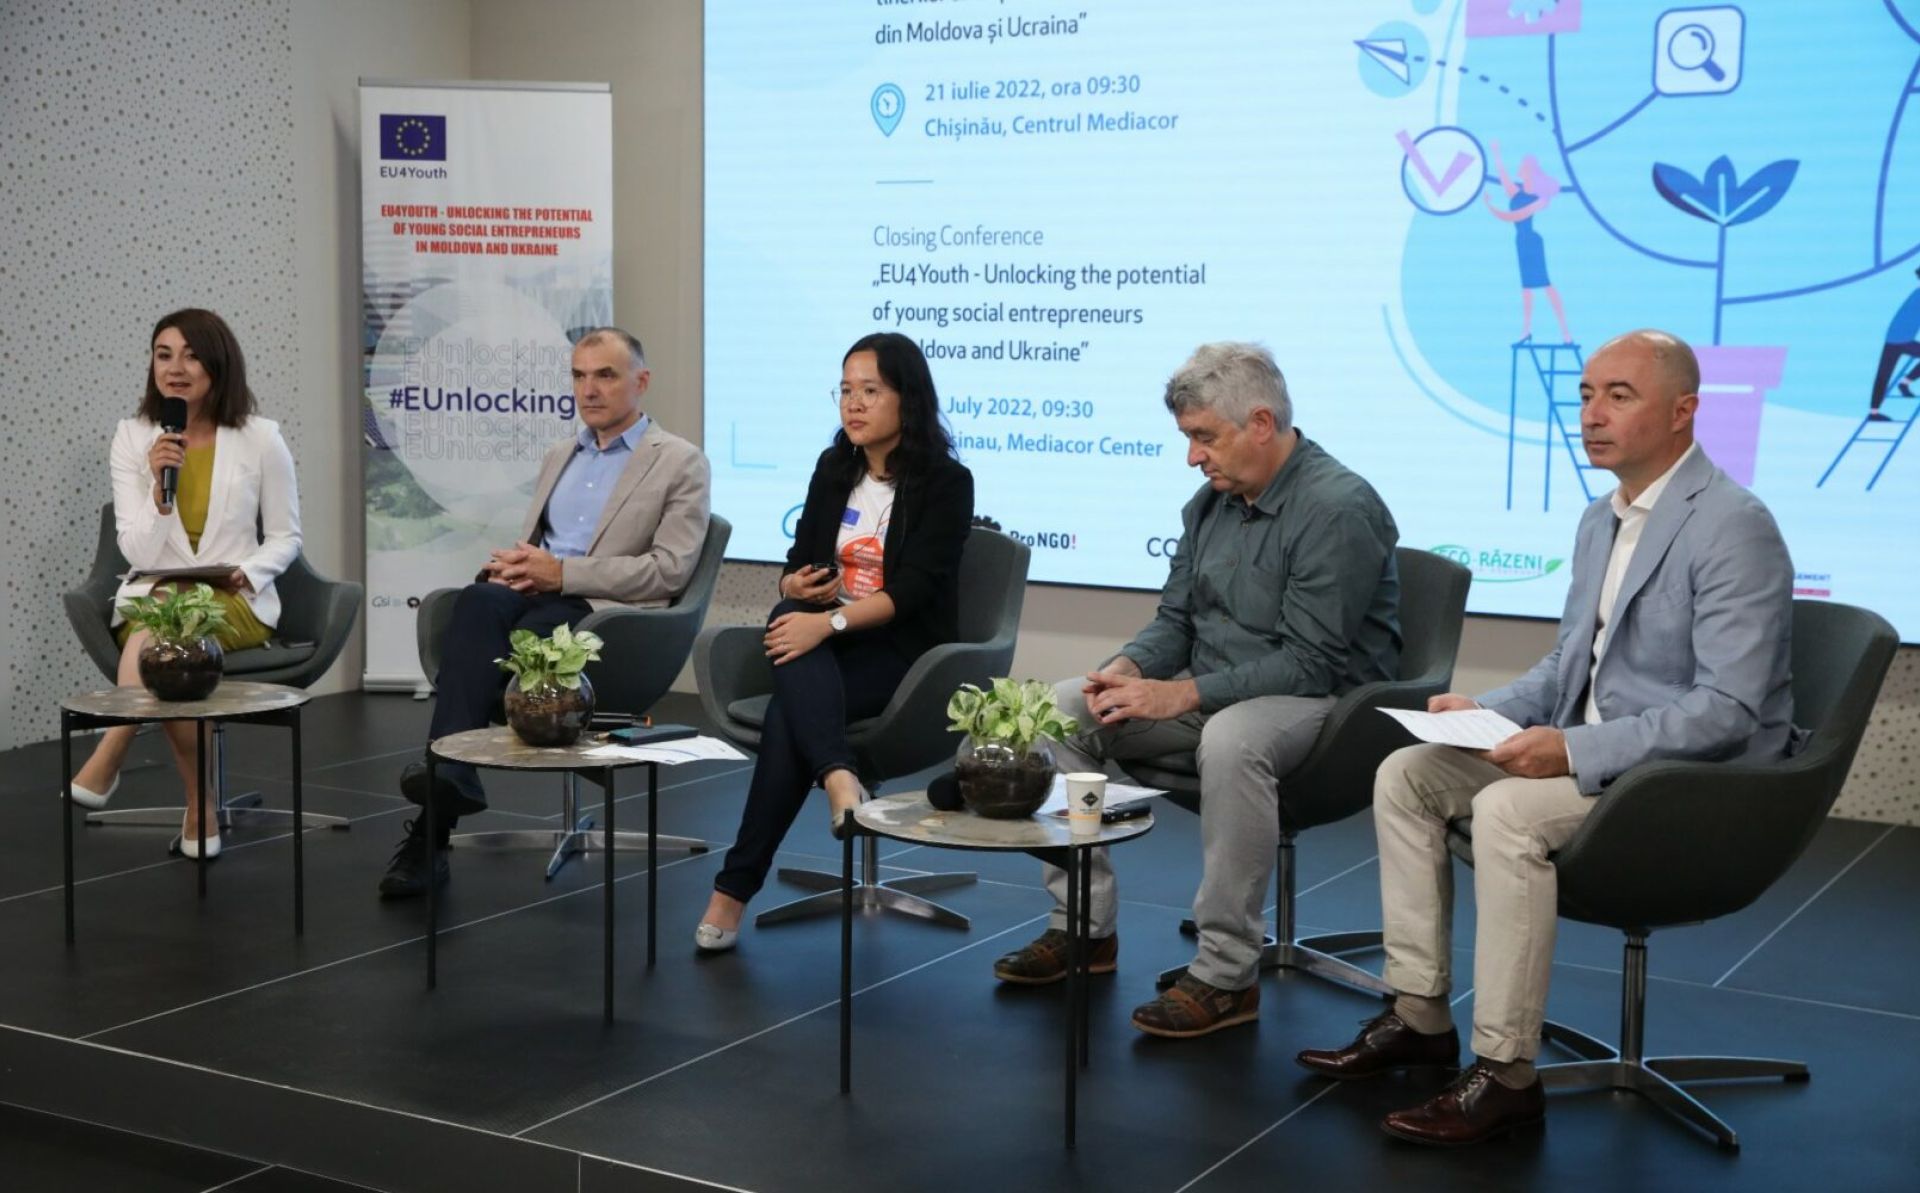 EUnlocking project comes to an end, having helped young social entrepreneurs in Moldova and Ukraine to launch social start-ups￼